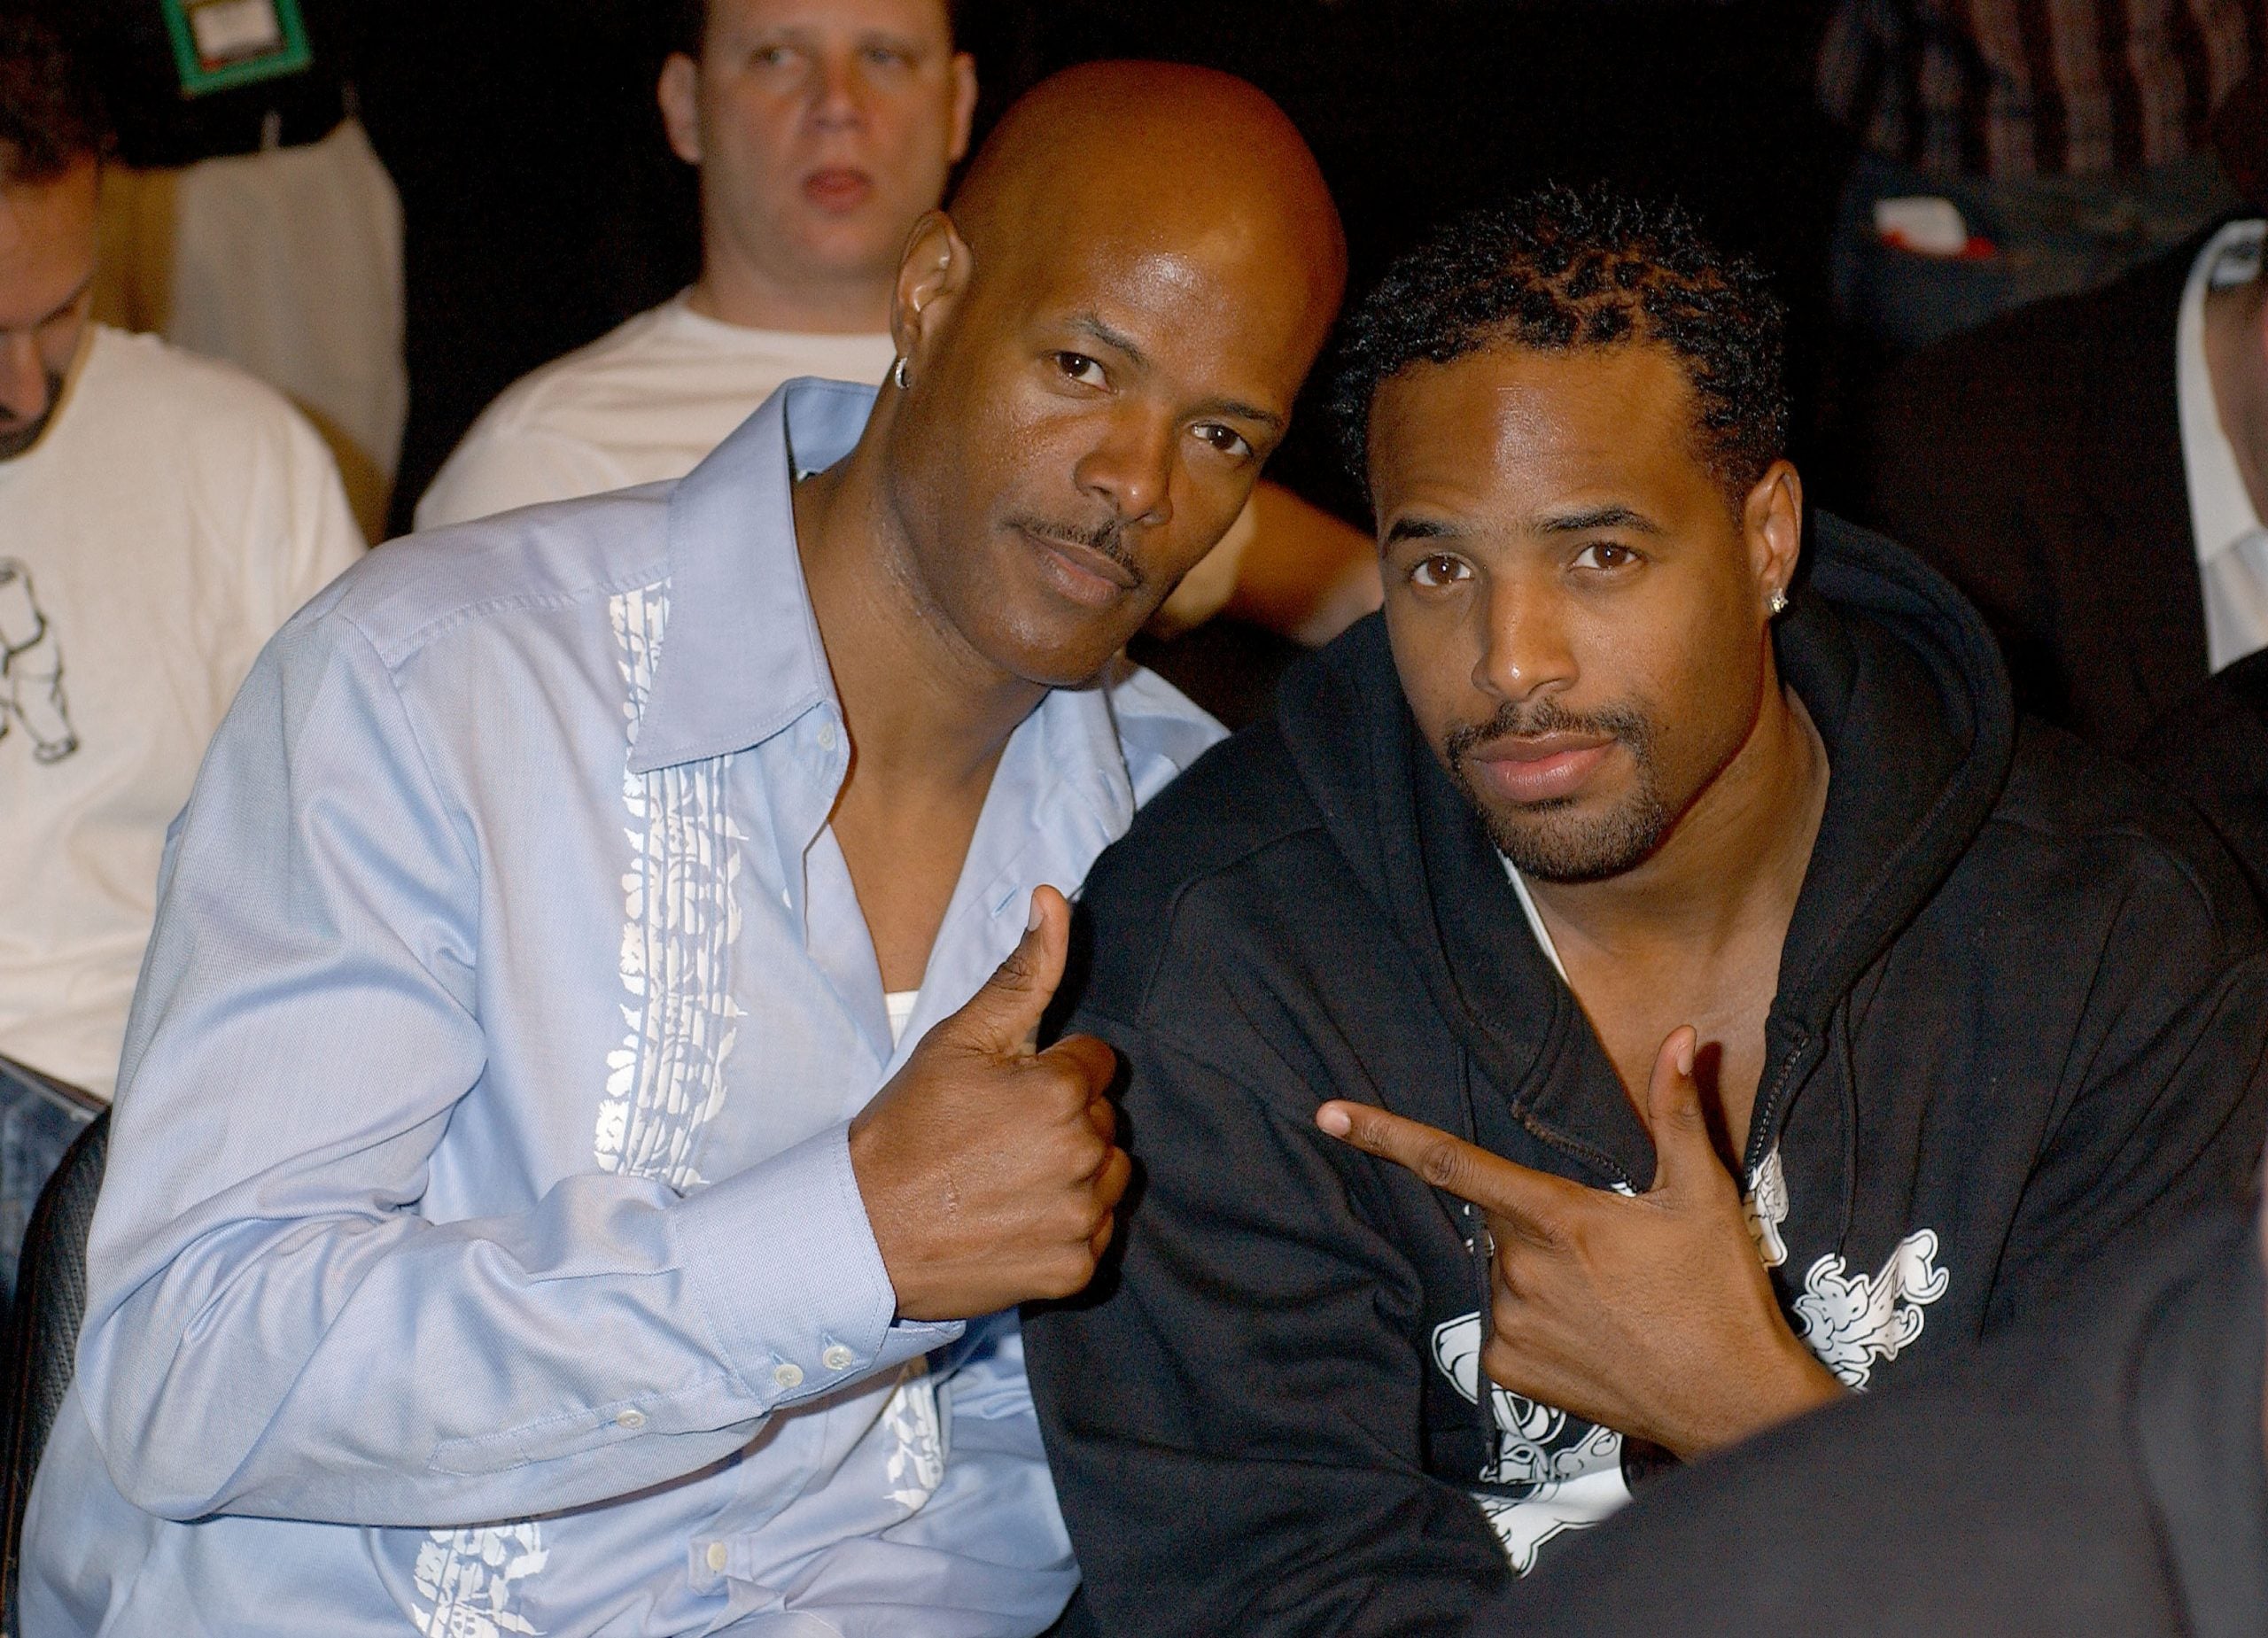 16 Photos Of The Wayans Family Being Black Hollywood Royalty